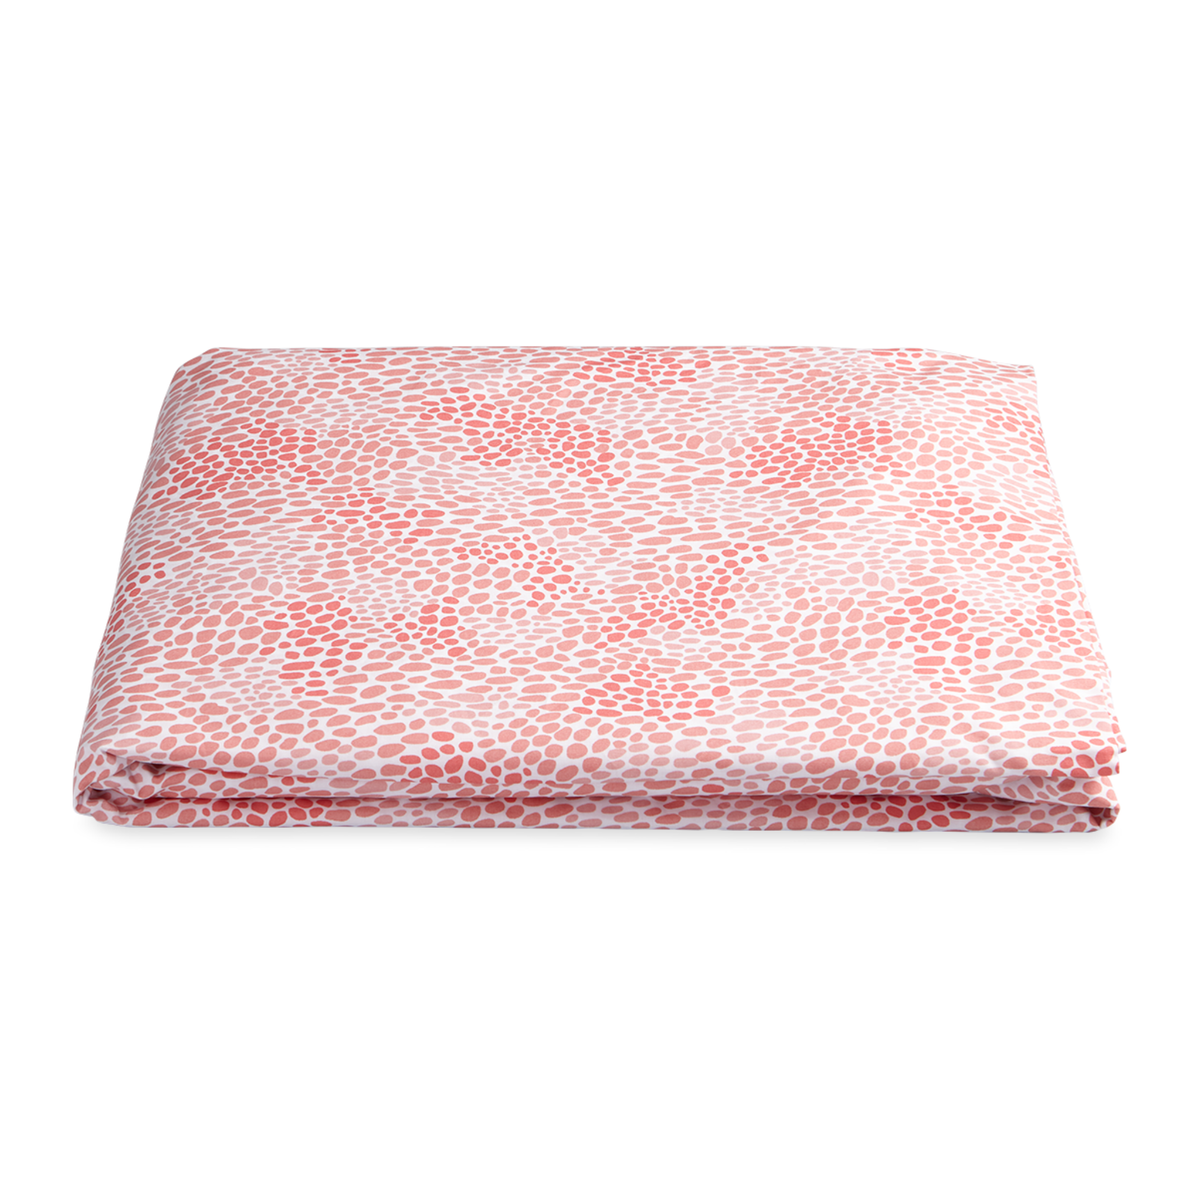 Fitted Sheet of Lulu DK Matouk Nikita Bedding in Coral Color